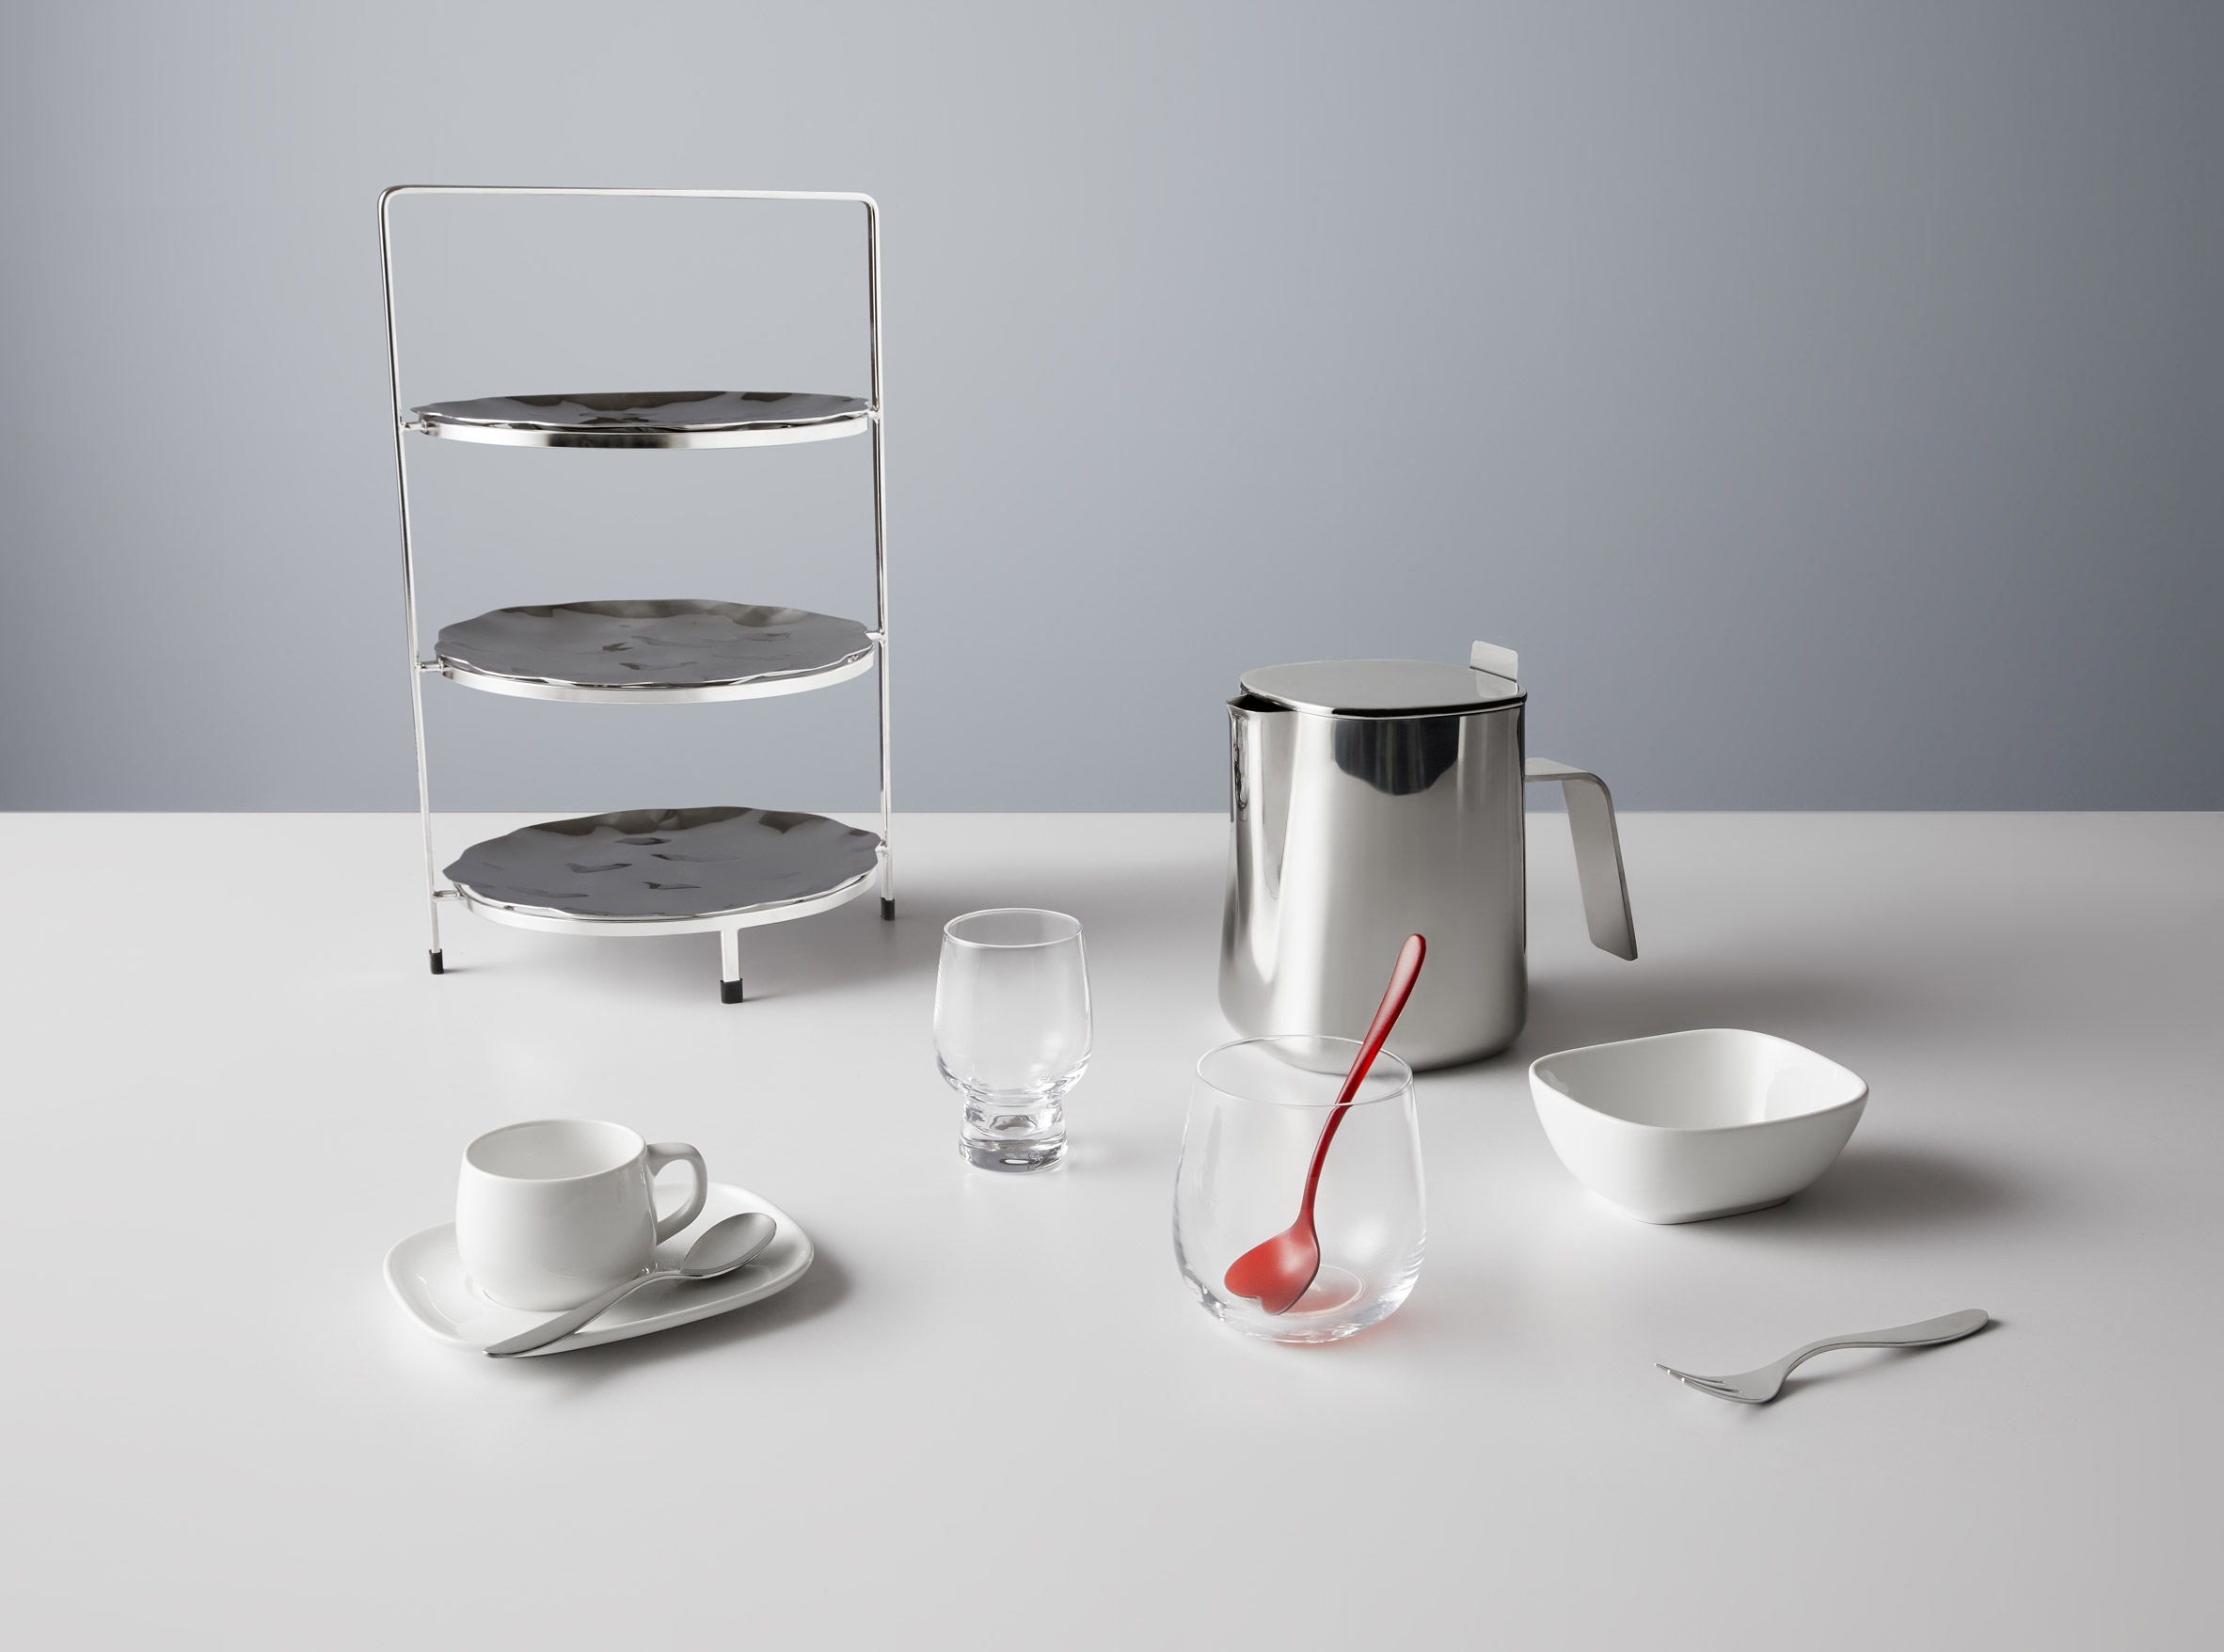 Delta's Fancy New Alessi Tableware Says a Lot About the State of